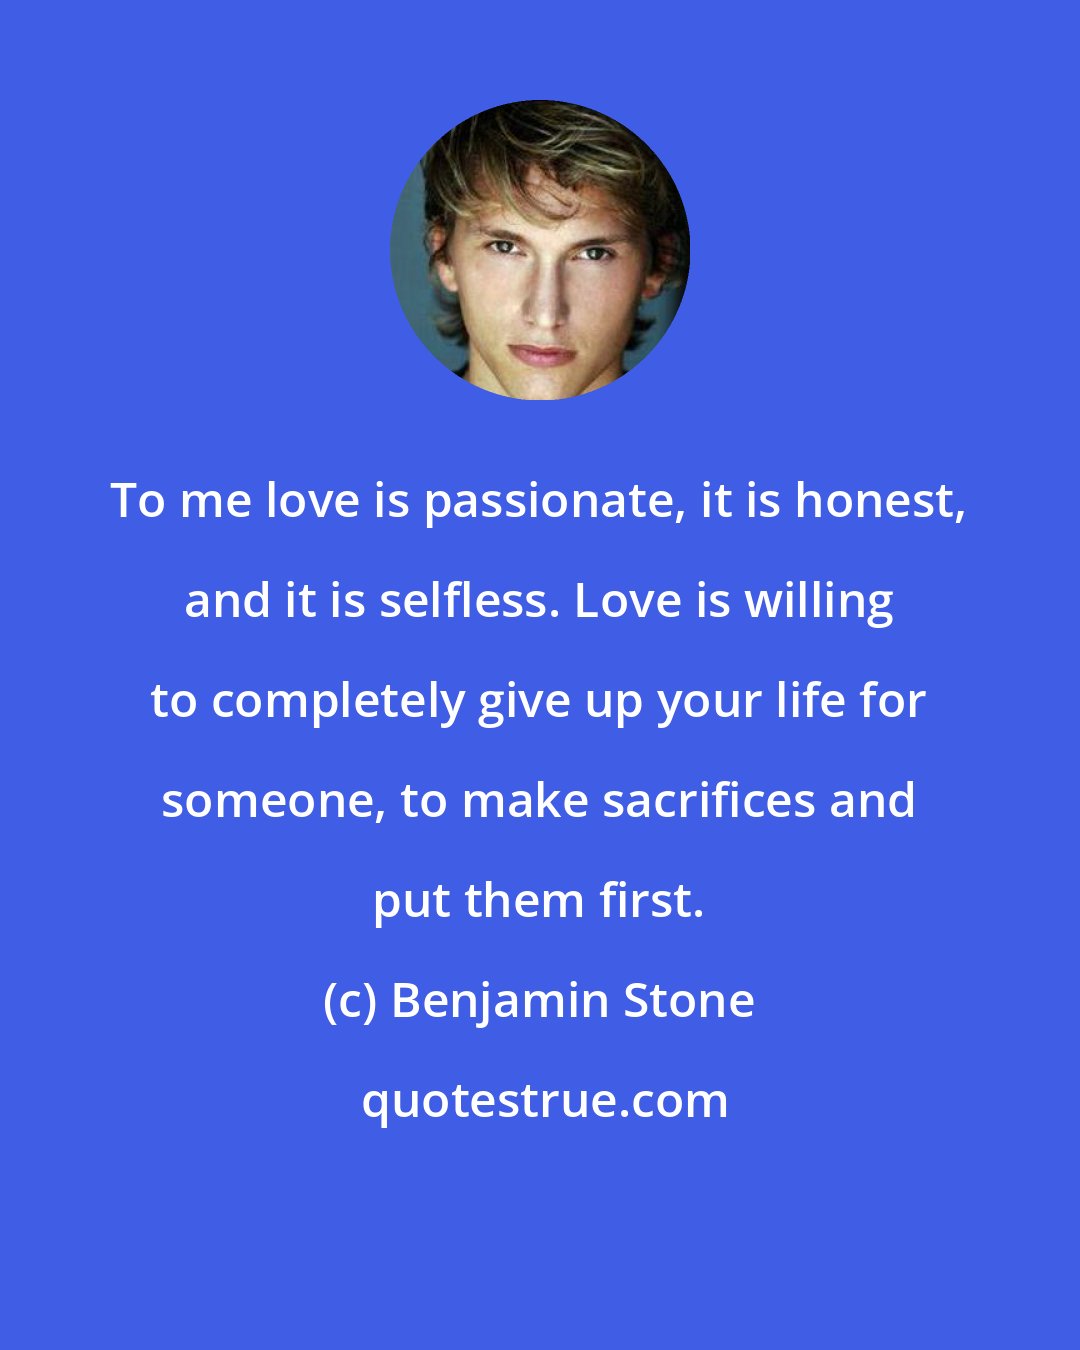 Benjamin Stone: To me love is passionate, it is honest, and it is selfless. Love is willing to completely give up your life for someone, to make sacrifices and put them first.